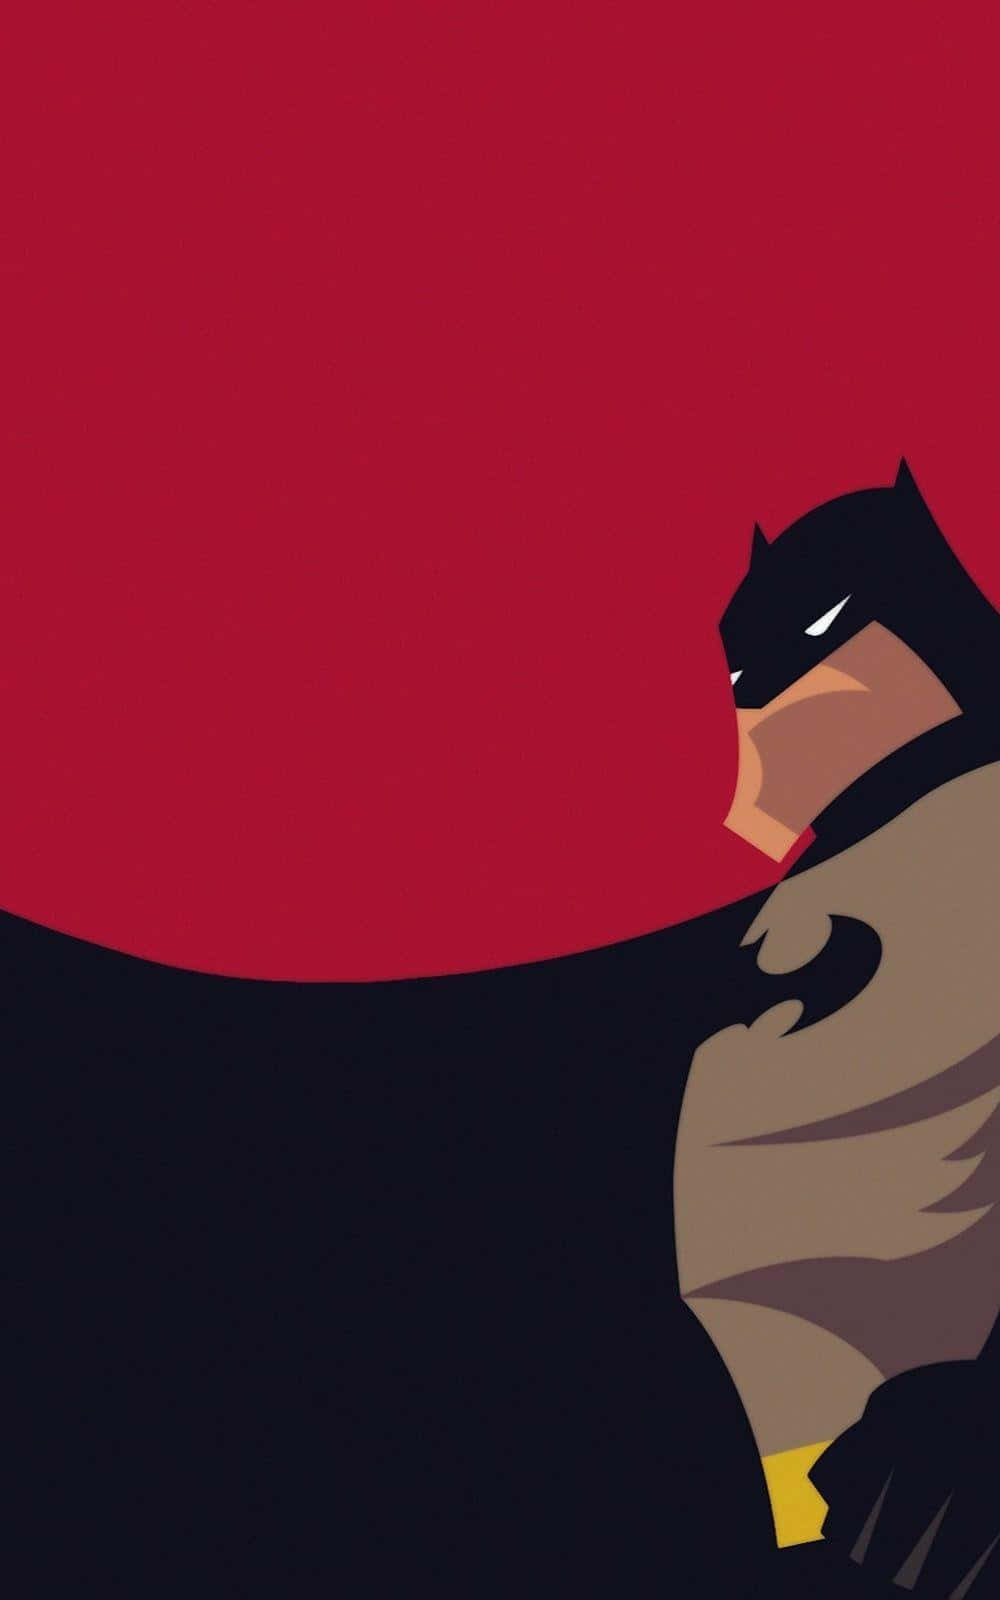 "The Caped Crusader goes high-tech with a Batman Android" Wallpaper